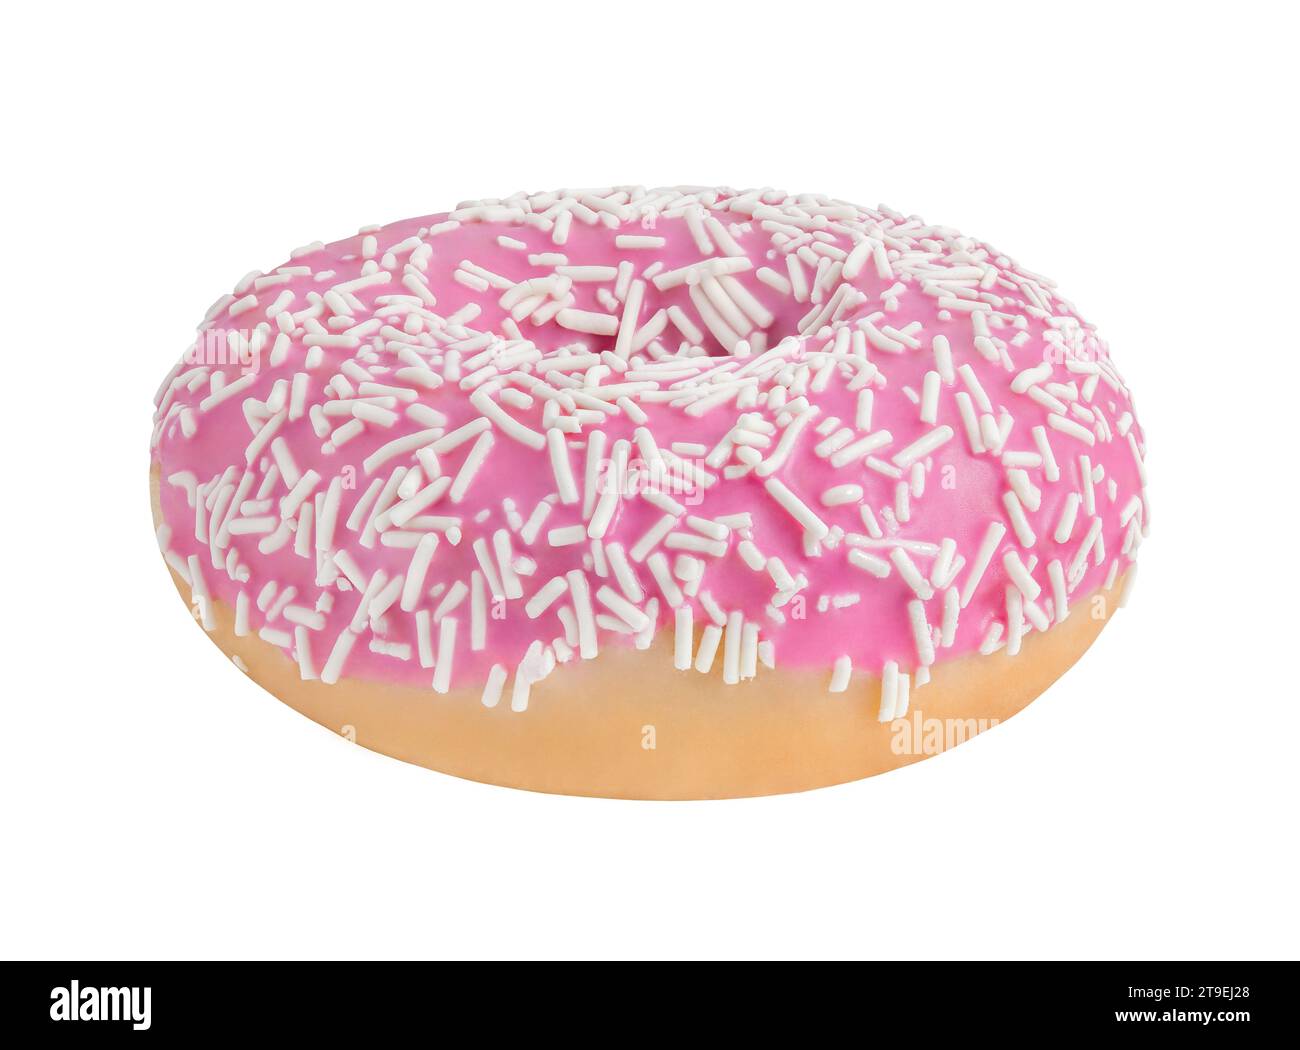 Donut with pink icing, isolated on white background with clipping path, element of packaging design. Full depth of field. Stock Photo